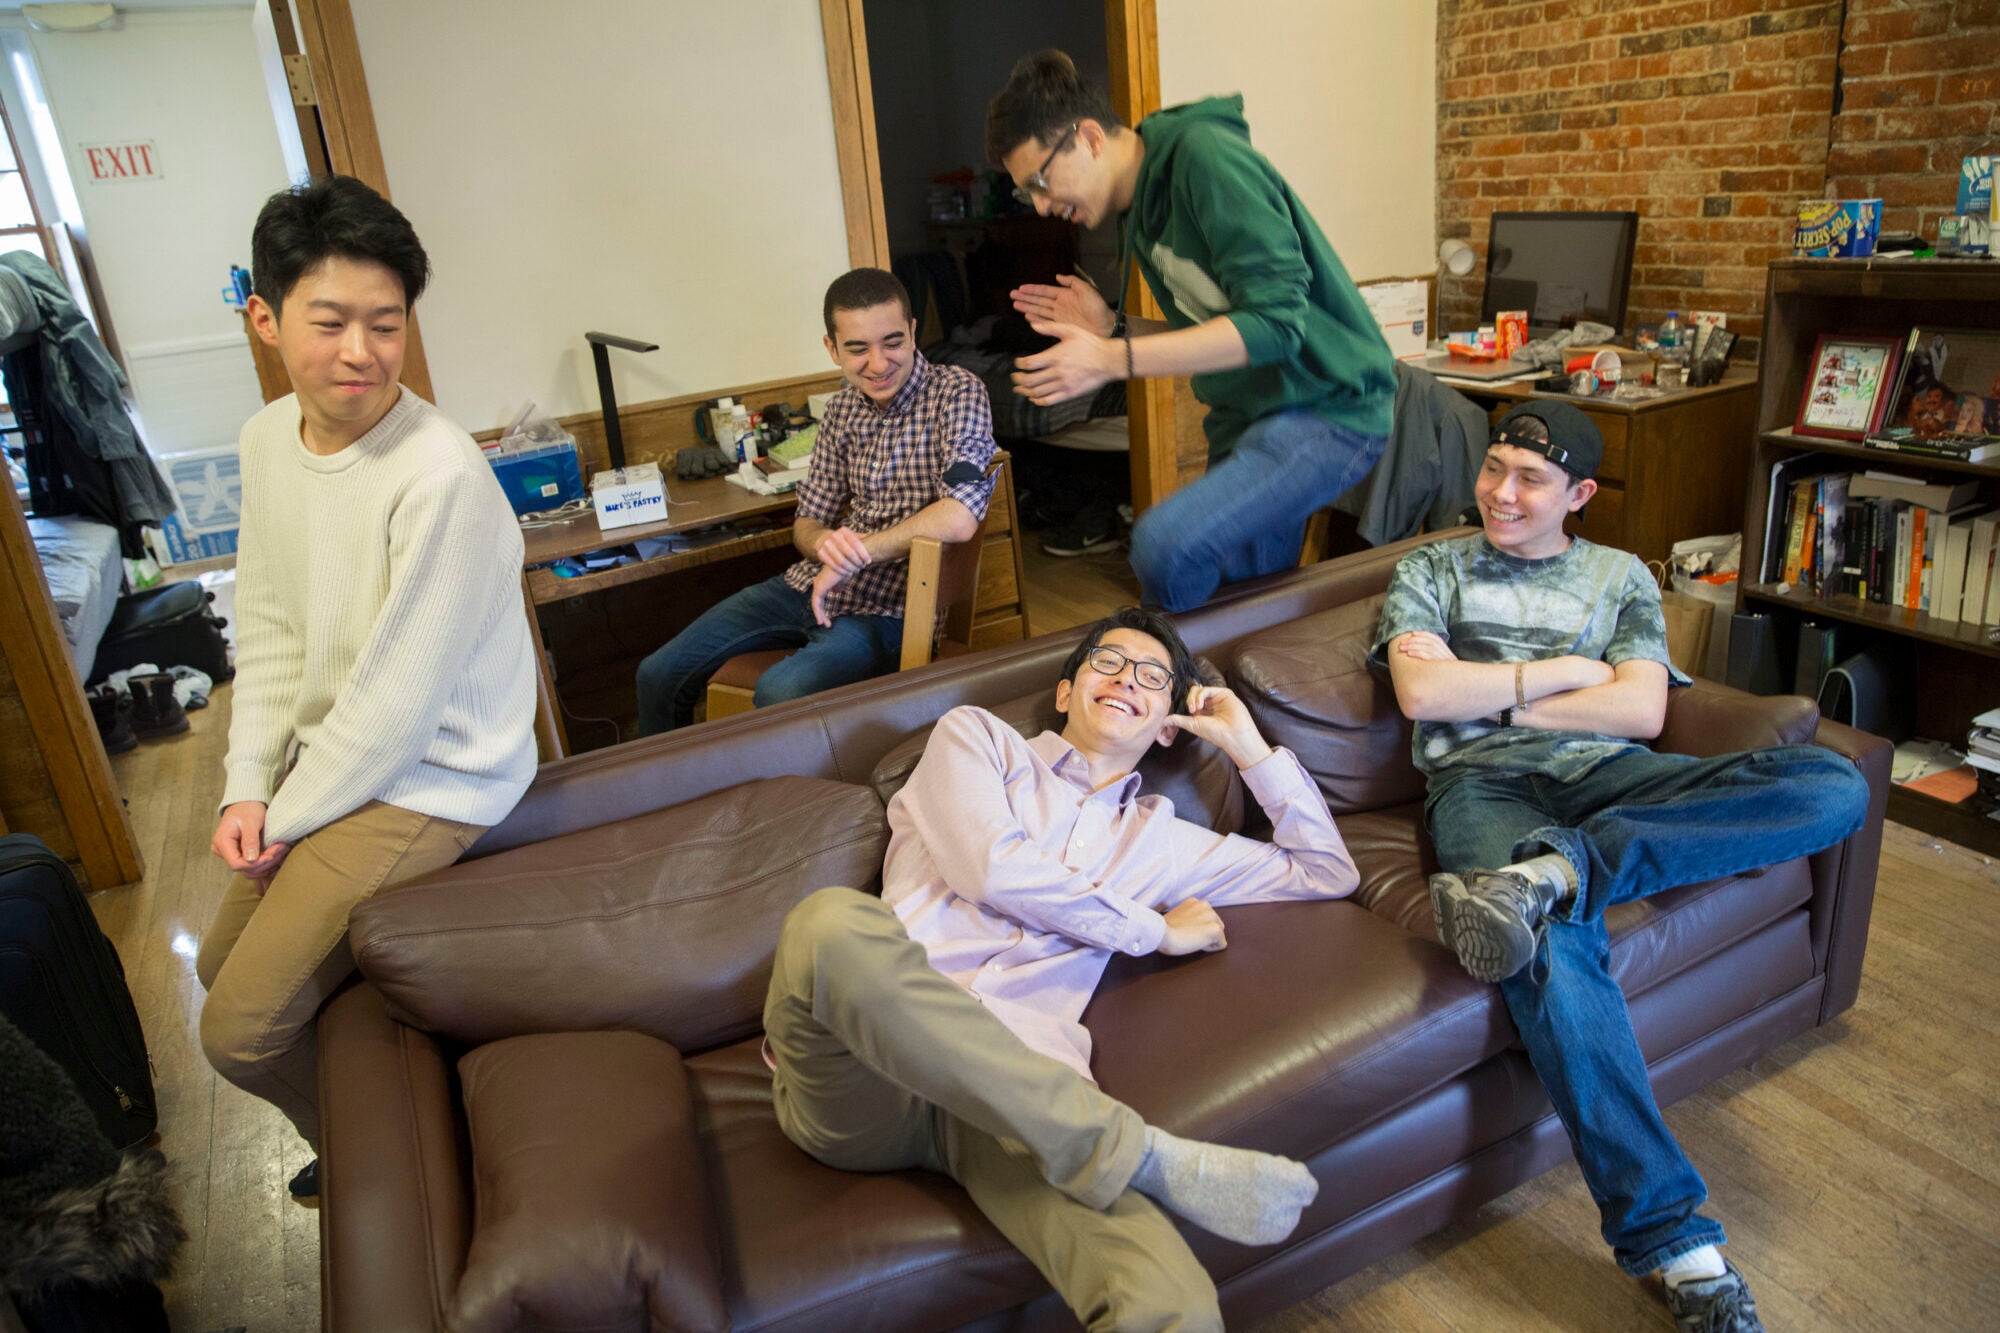 Five young men lounge and laugh on a couch and at a desk in a dorm room